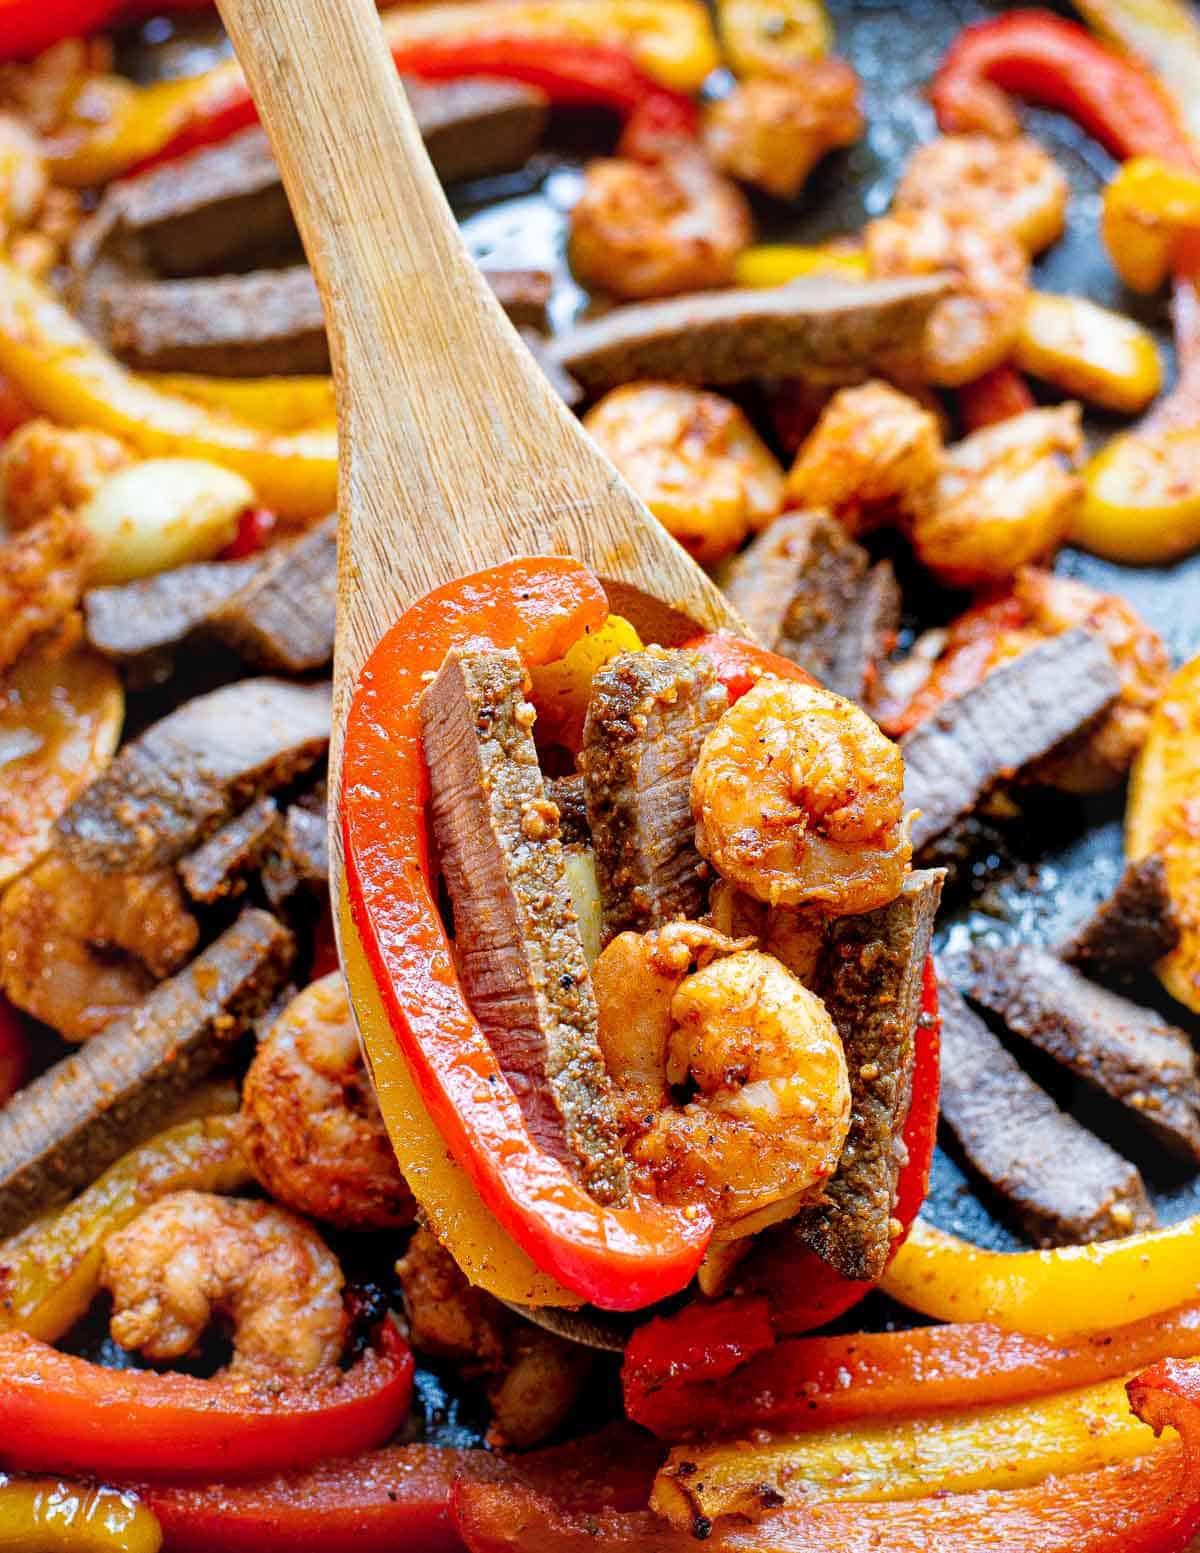 Shrimp and steak fajitas on a sheet pan with a wooden spoon.